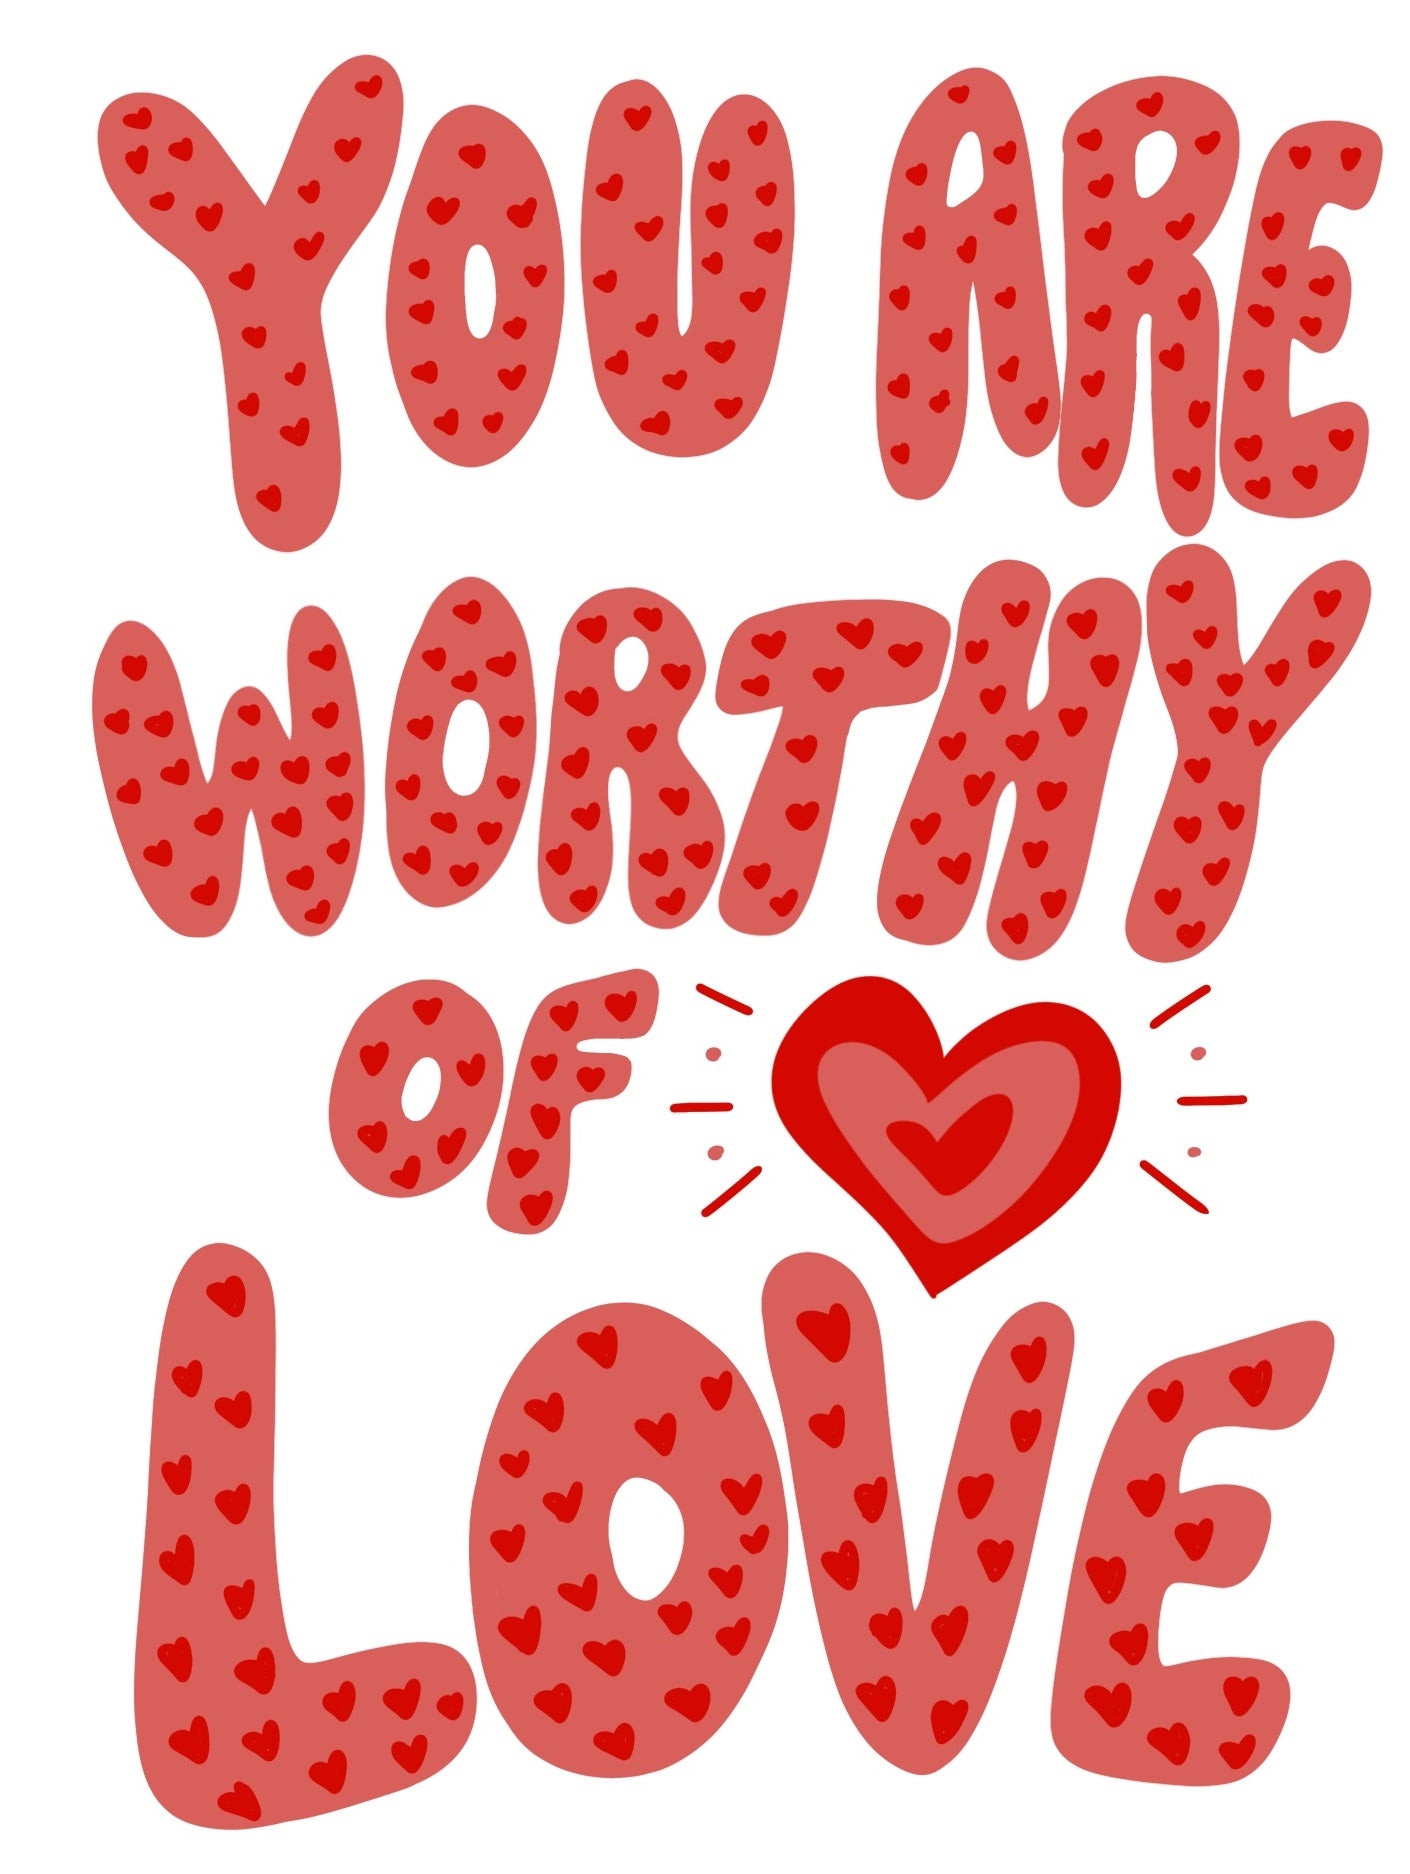 You Are Worthy of Love